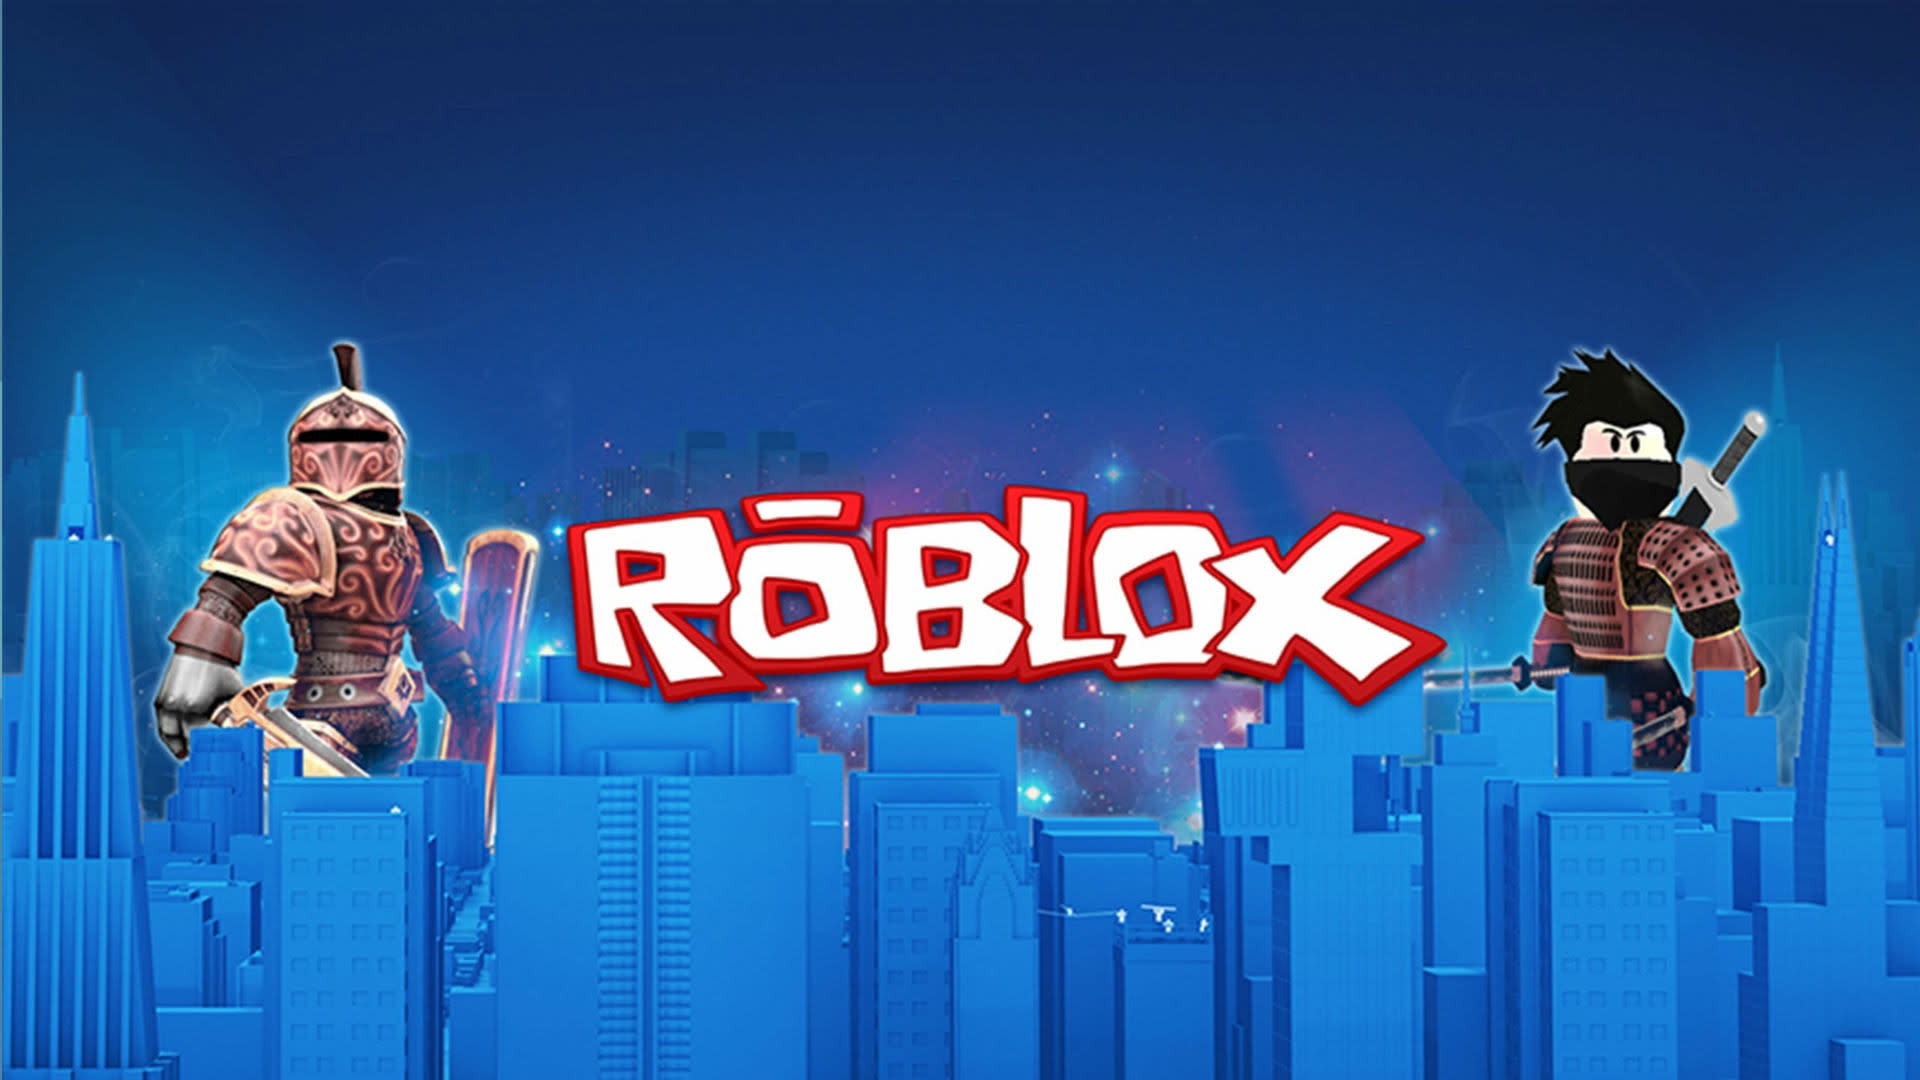 Roblox Enters Vr Space With Cross Platform Support - four letter names that aren't taken on roblox